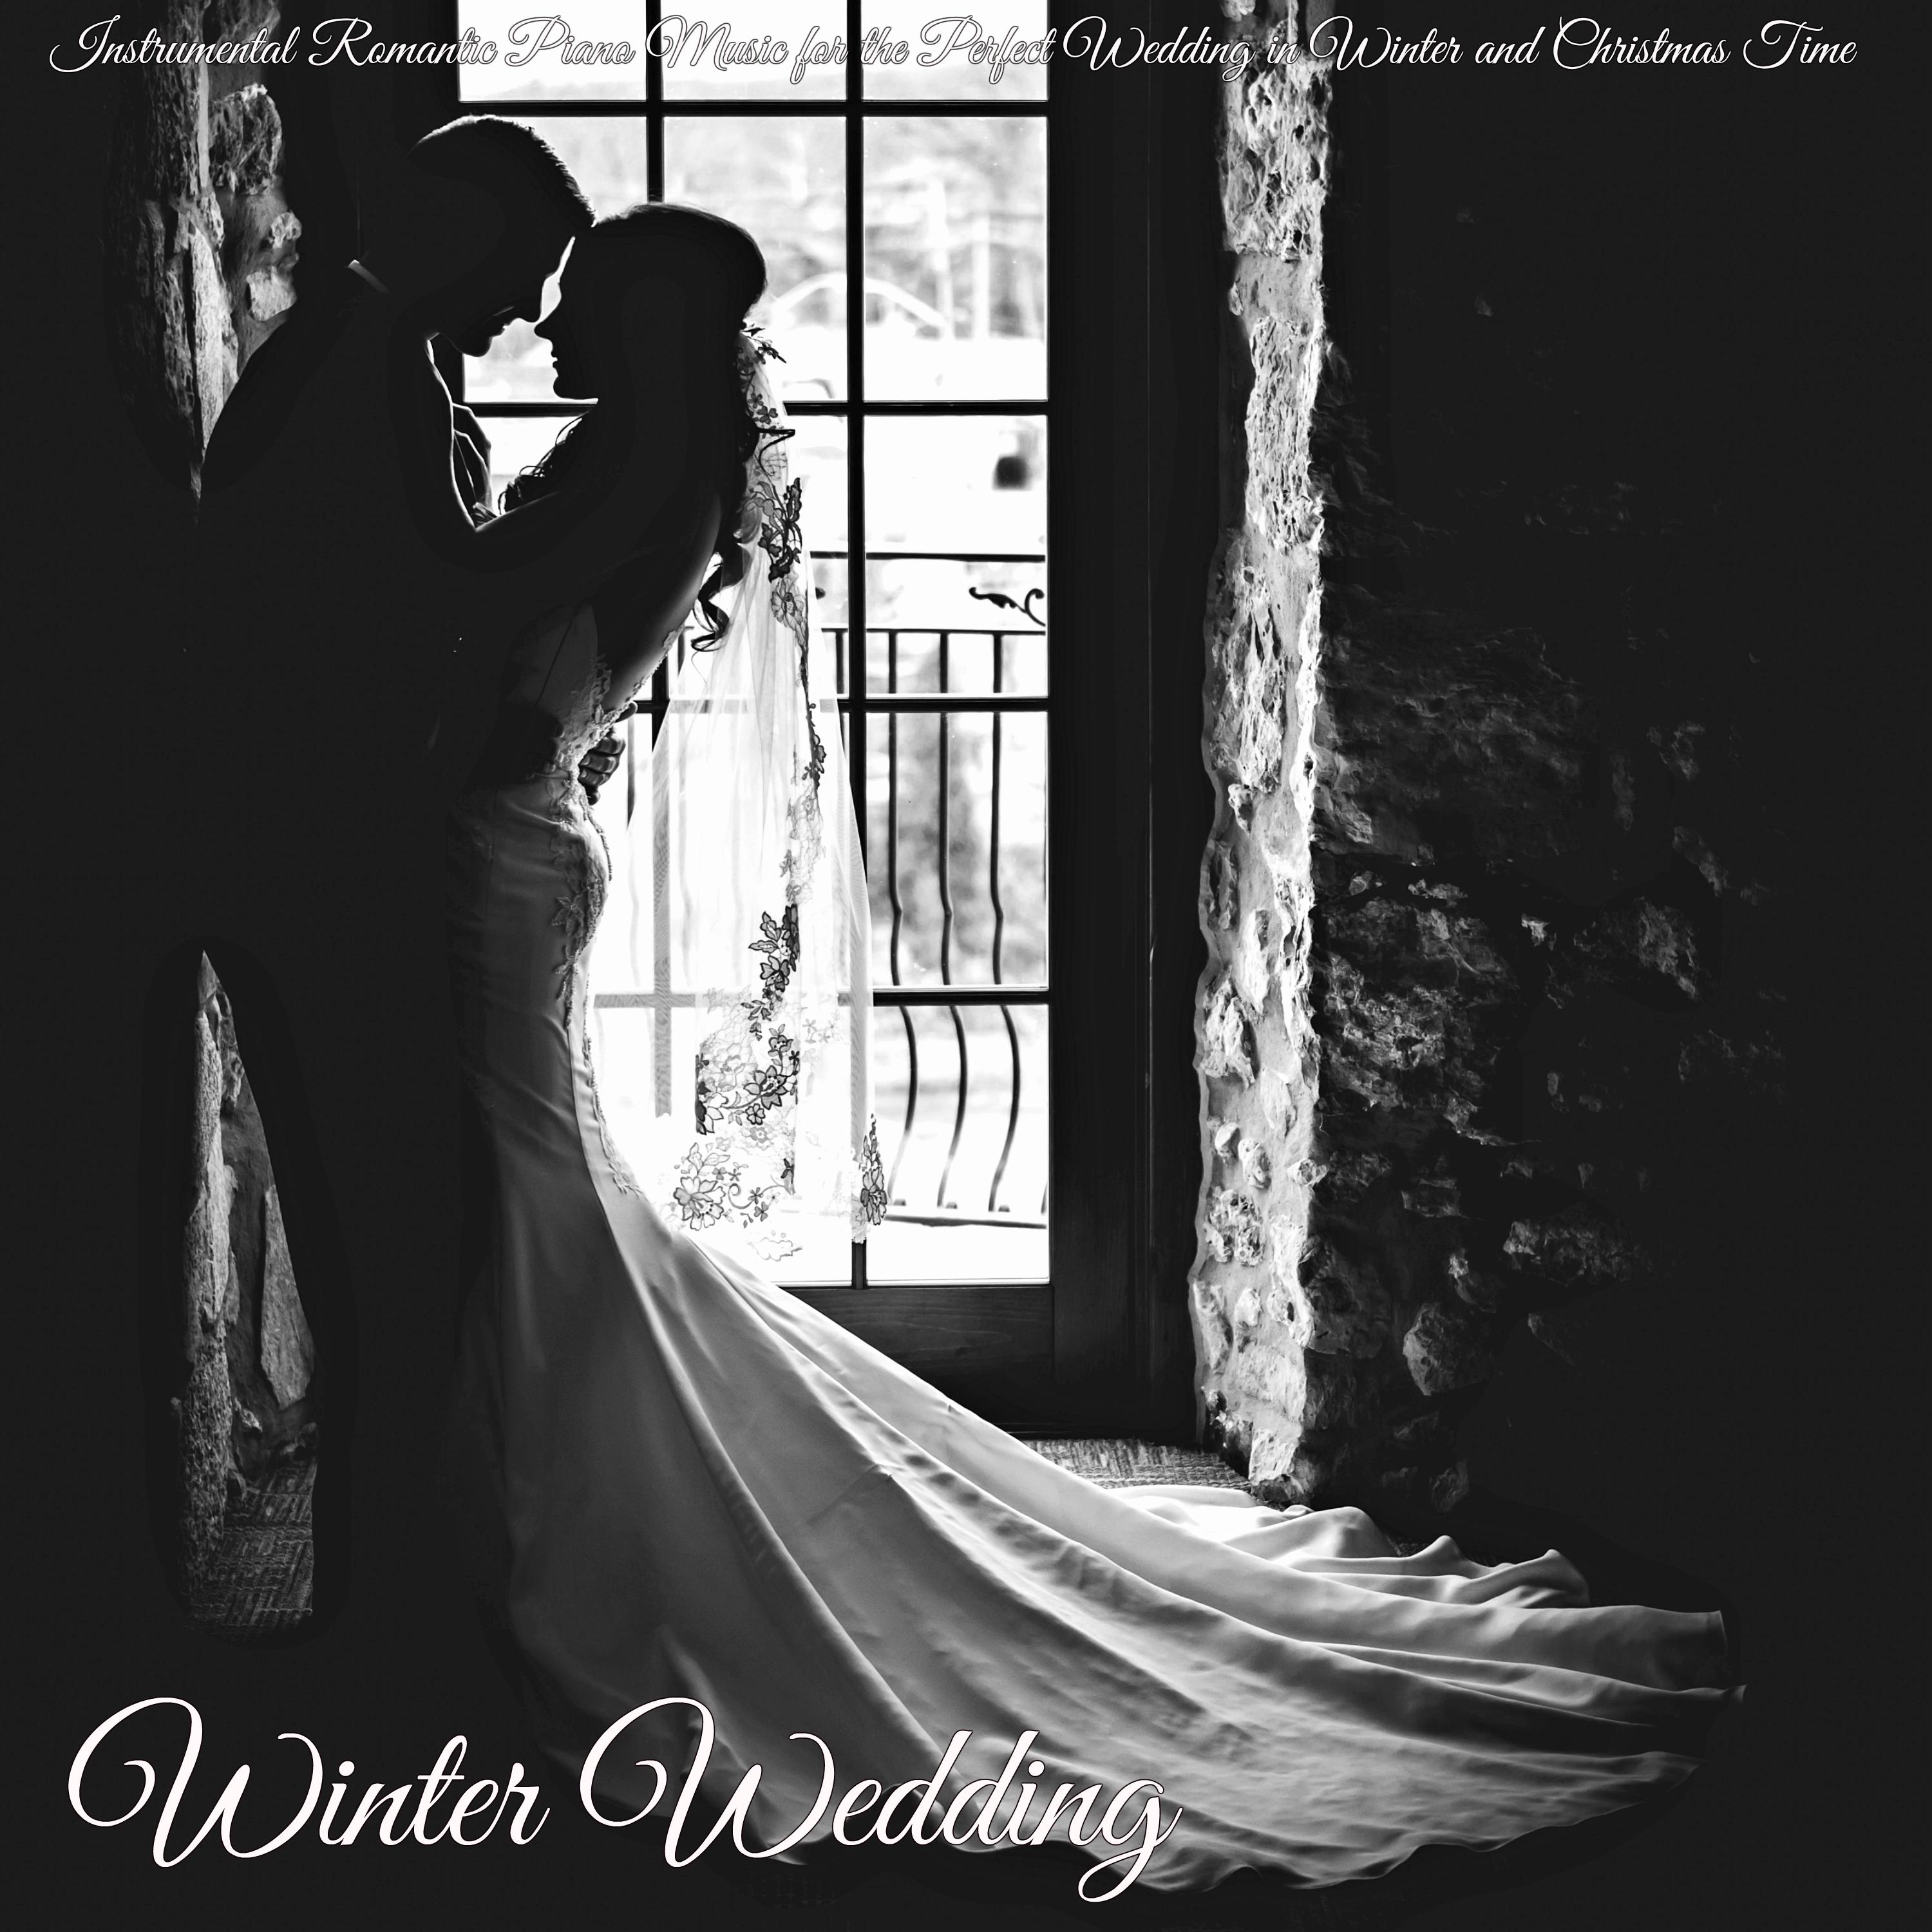 A Cool Piano in The Night - Winter Wedding